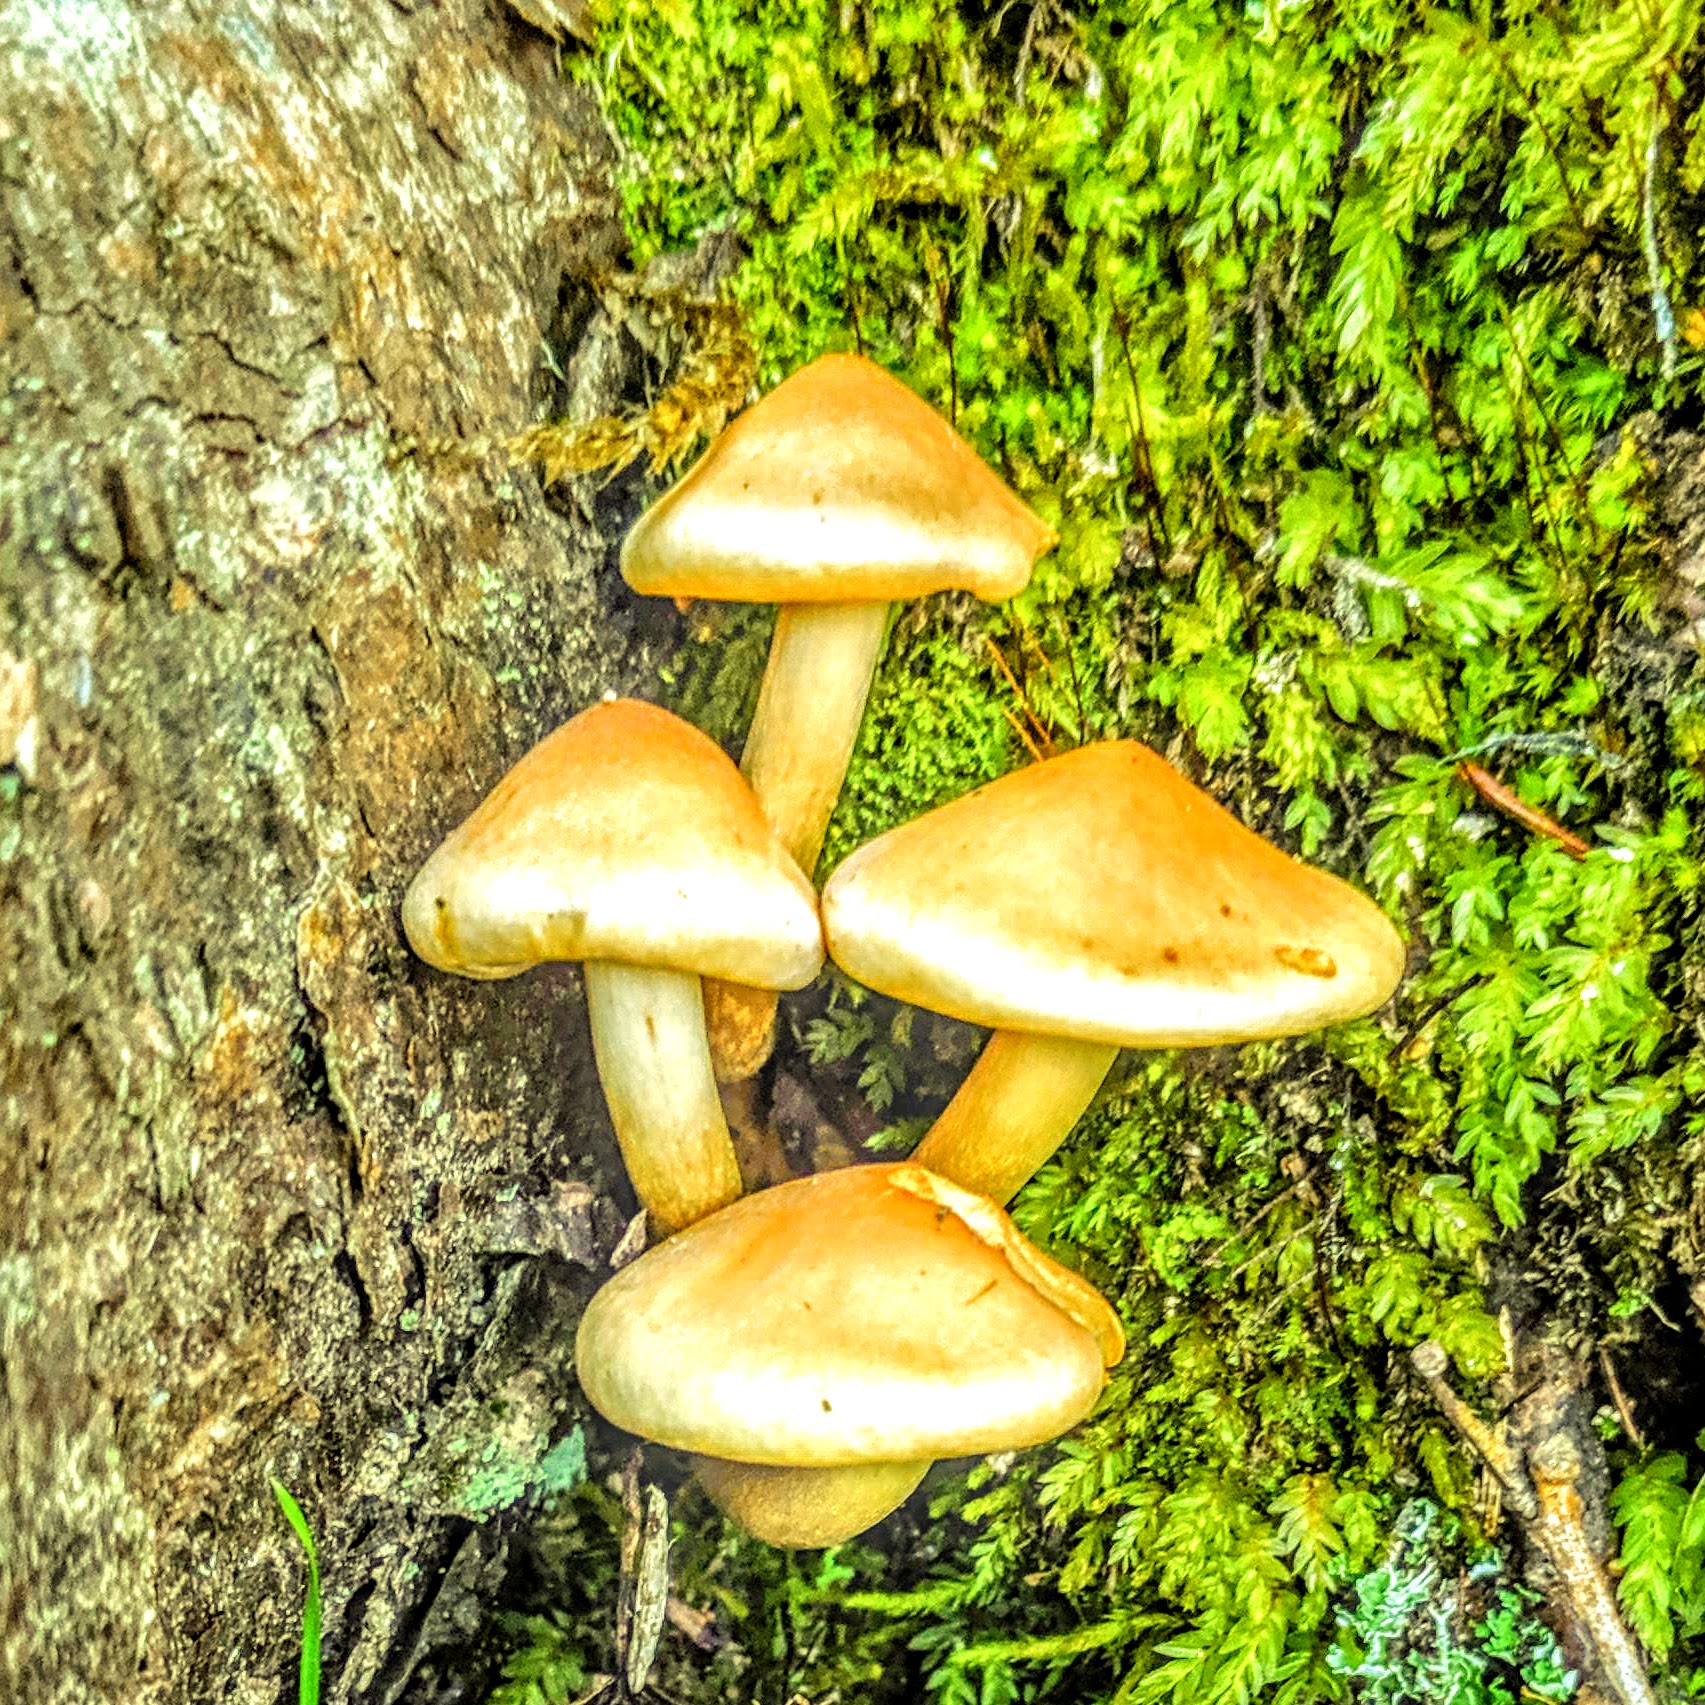 Four mushrooms growing on a tree next to green moss in Downeast, Maine.